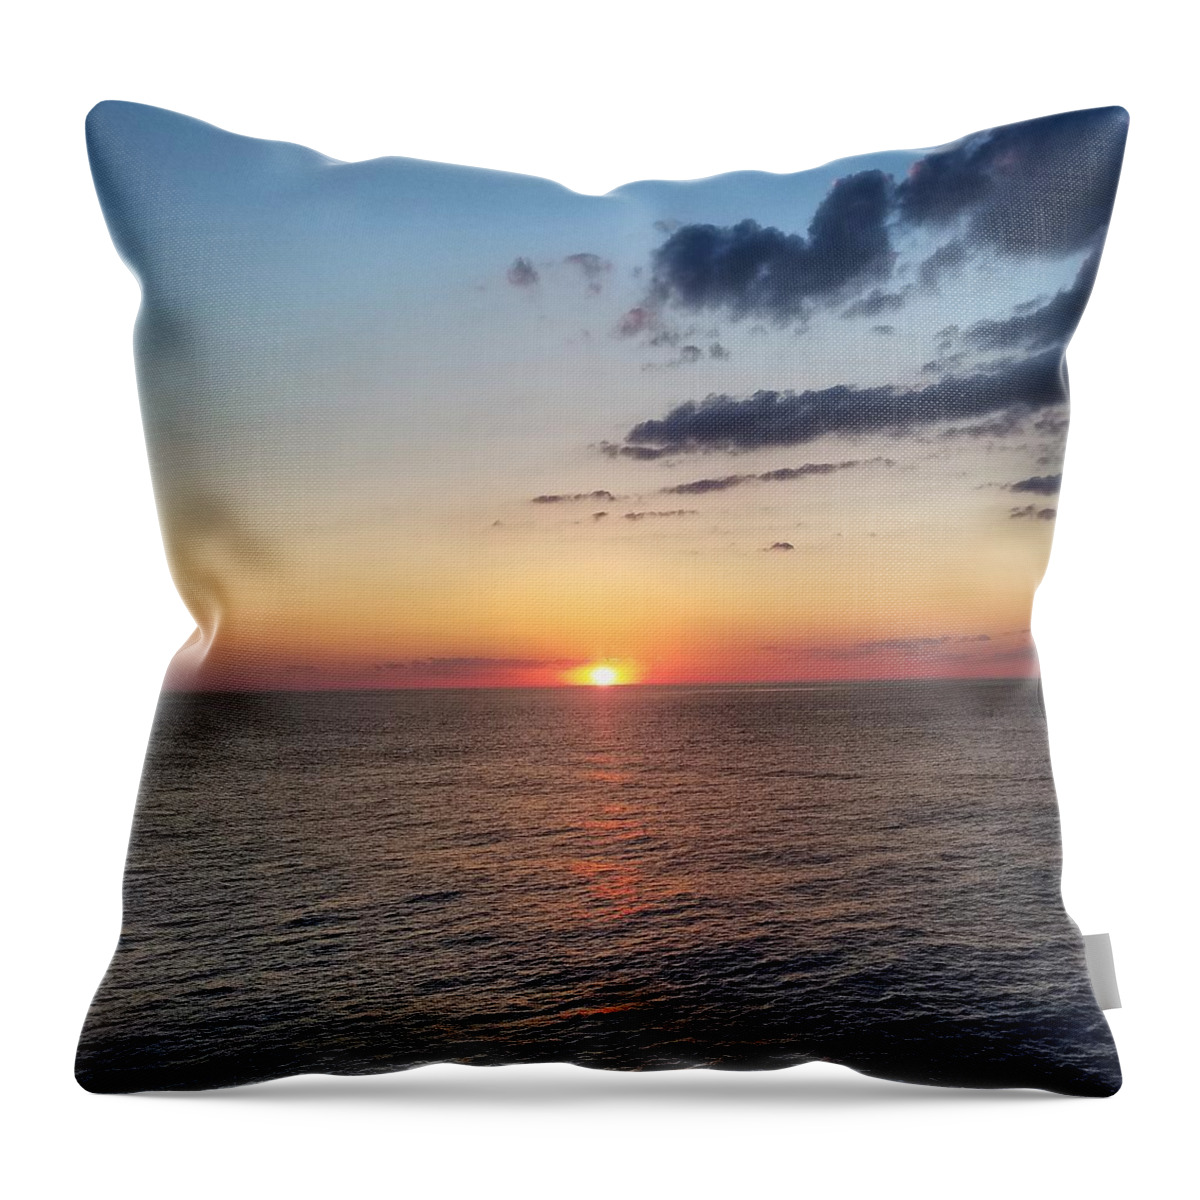 Sunset Throw Pillow featuring the photograph Red Sunset Over Ocean by Vic Ritchey